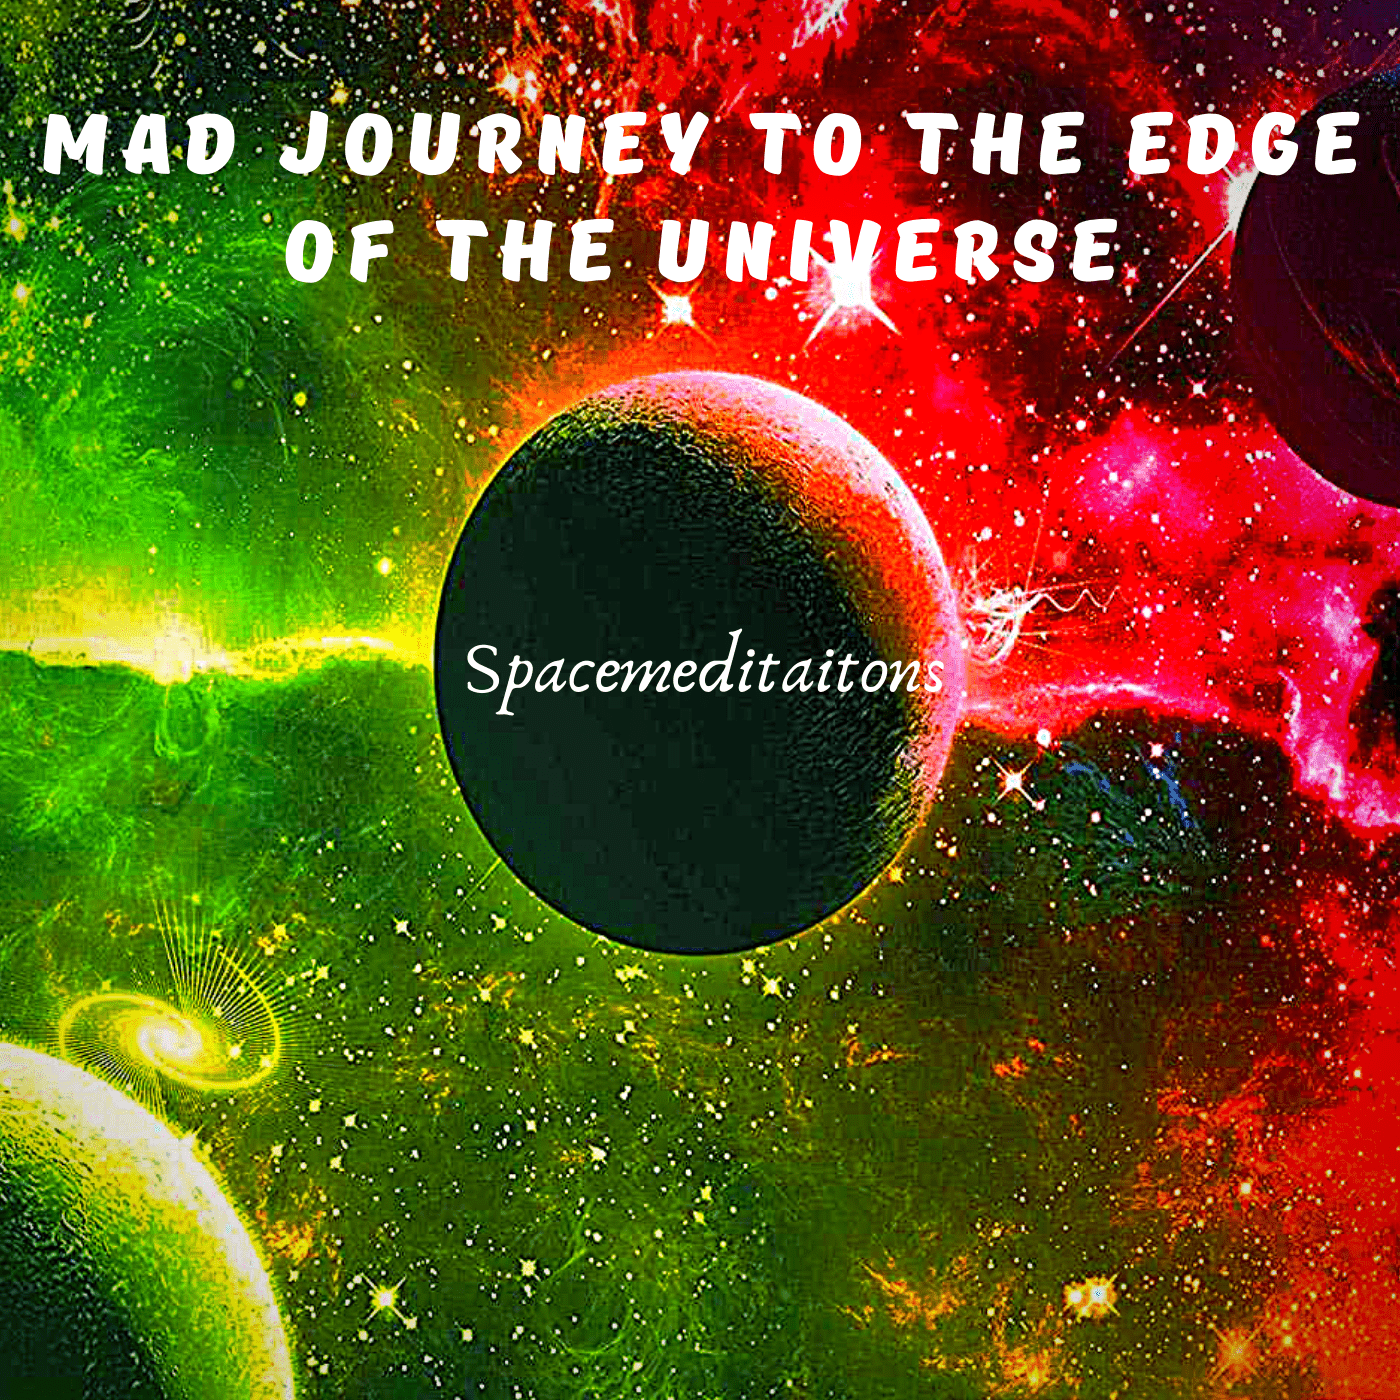 Mad journey to the edge of the universe. Spacemeditations